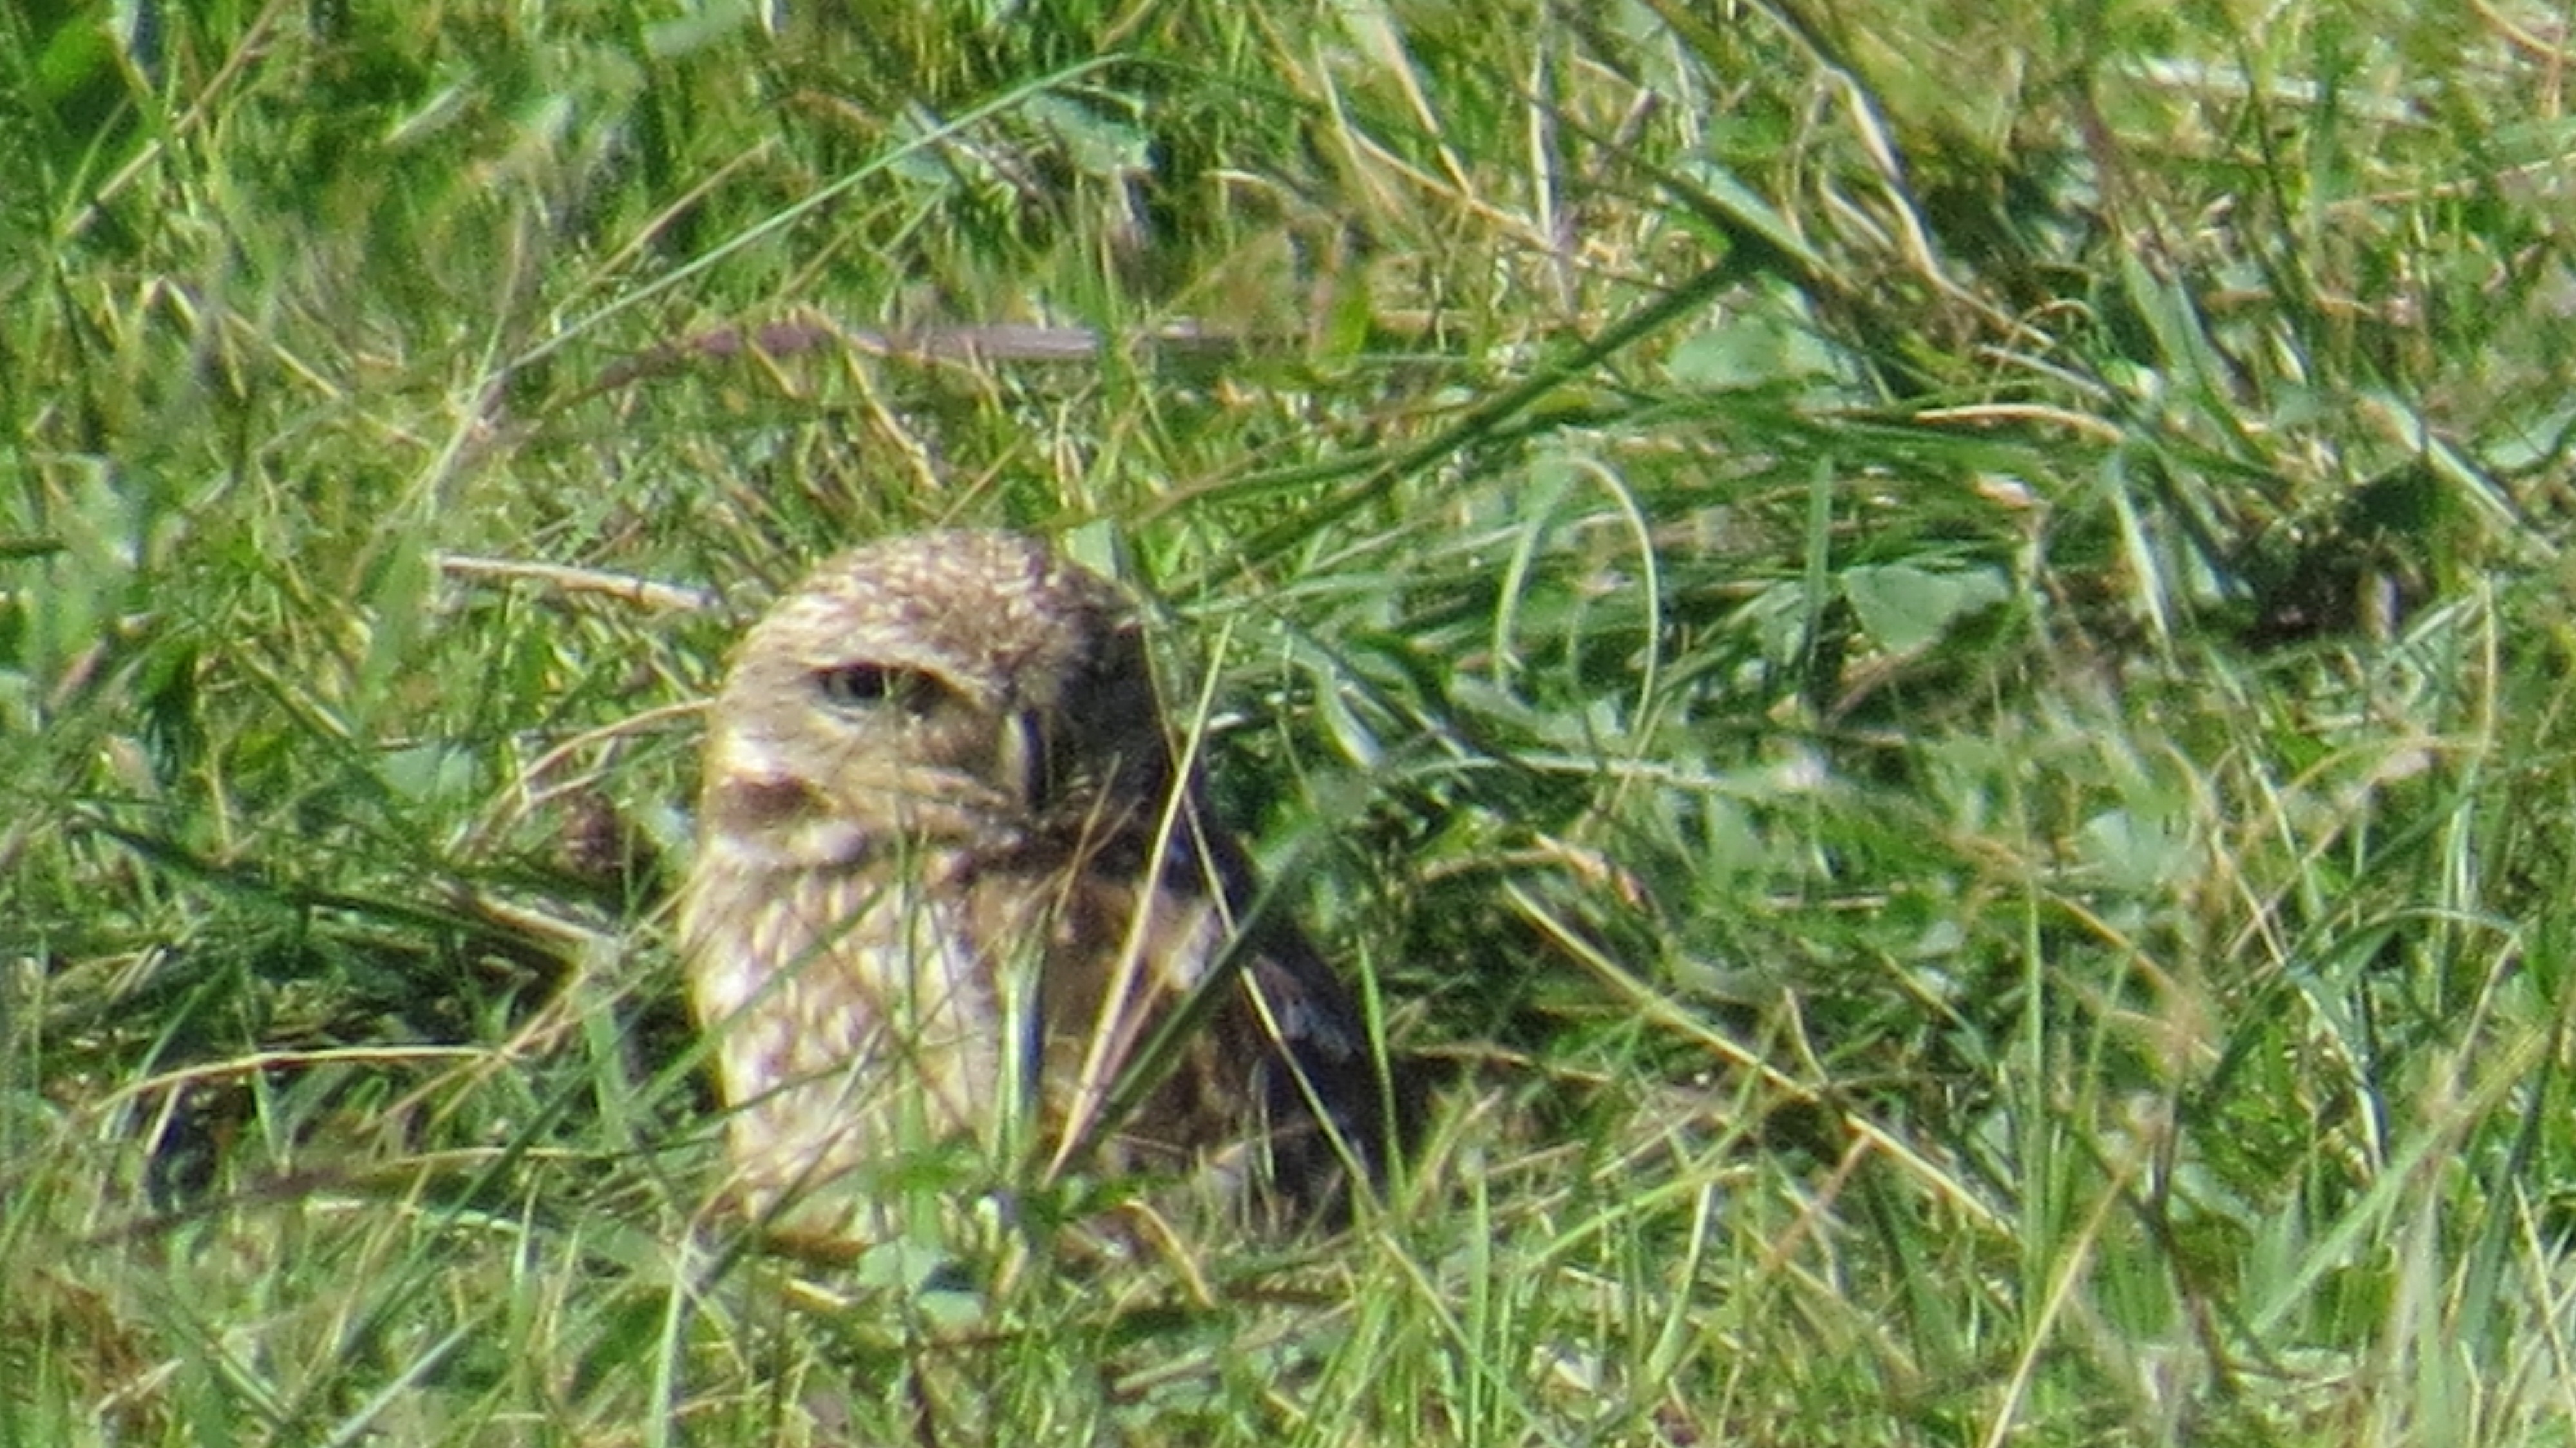 It's a lucky day when one can spot this little guy, a Burrowing Owl. He's guarding the burrow and searching for food while Mama is minding the nest. 